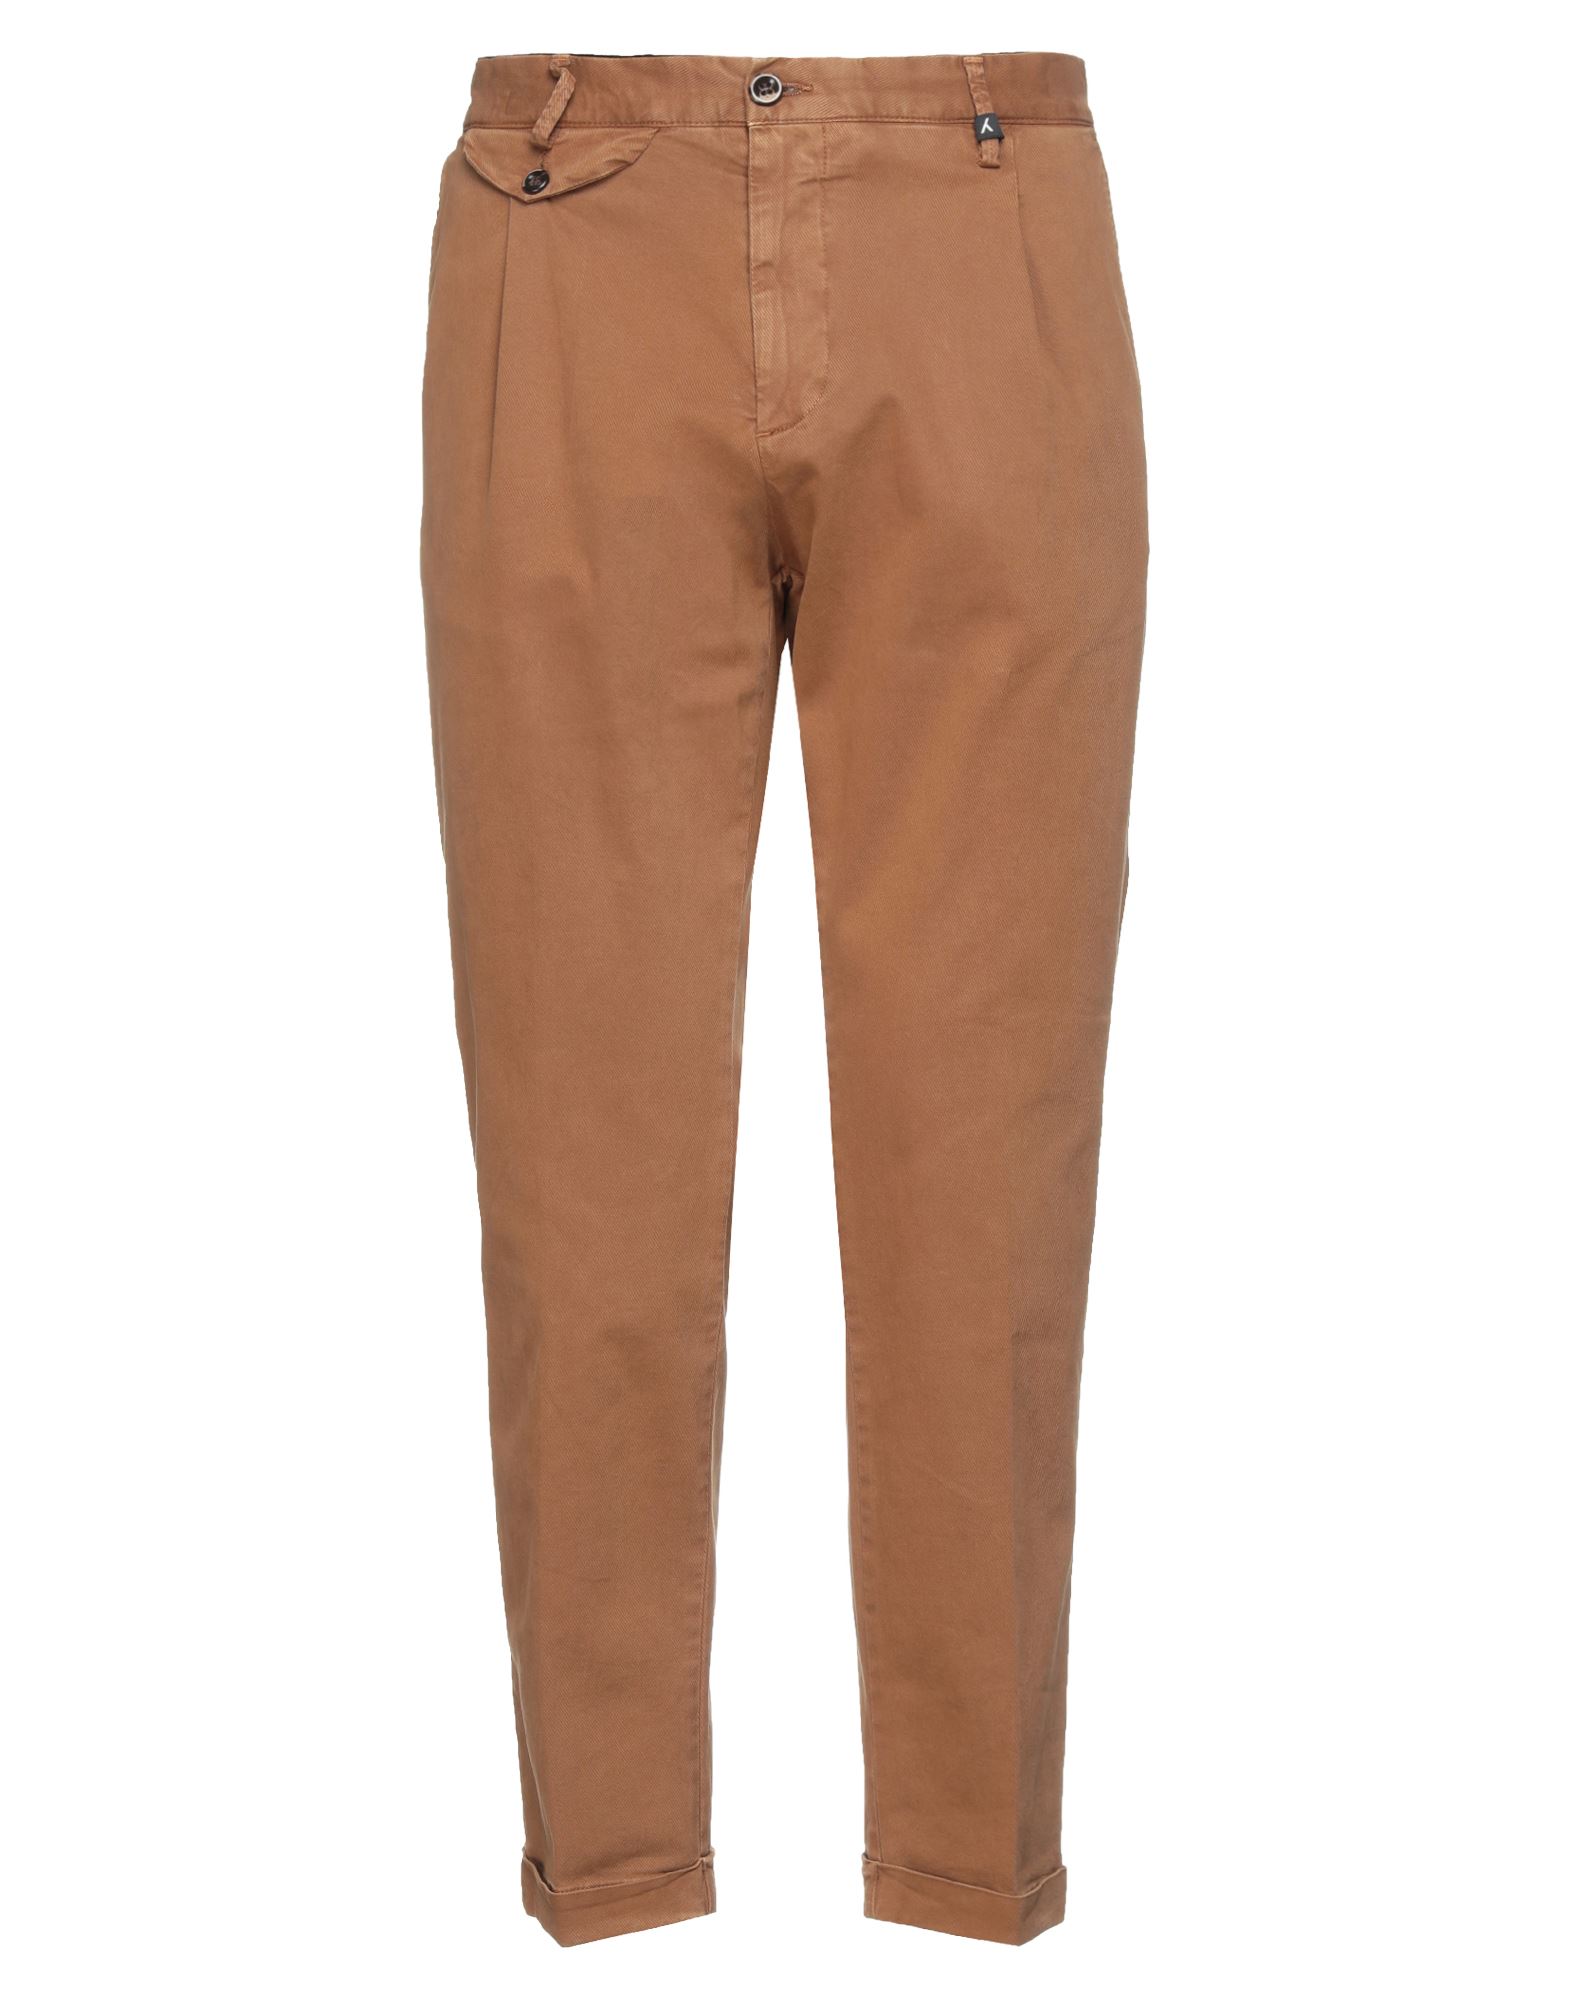 Myths Pants In Brown